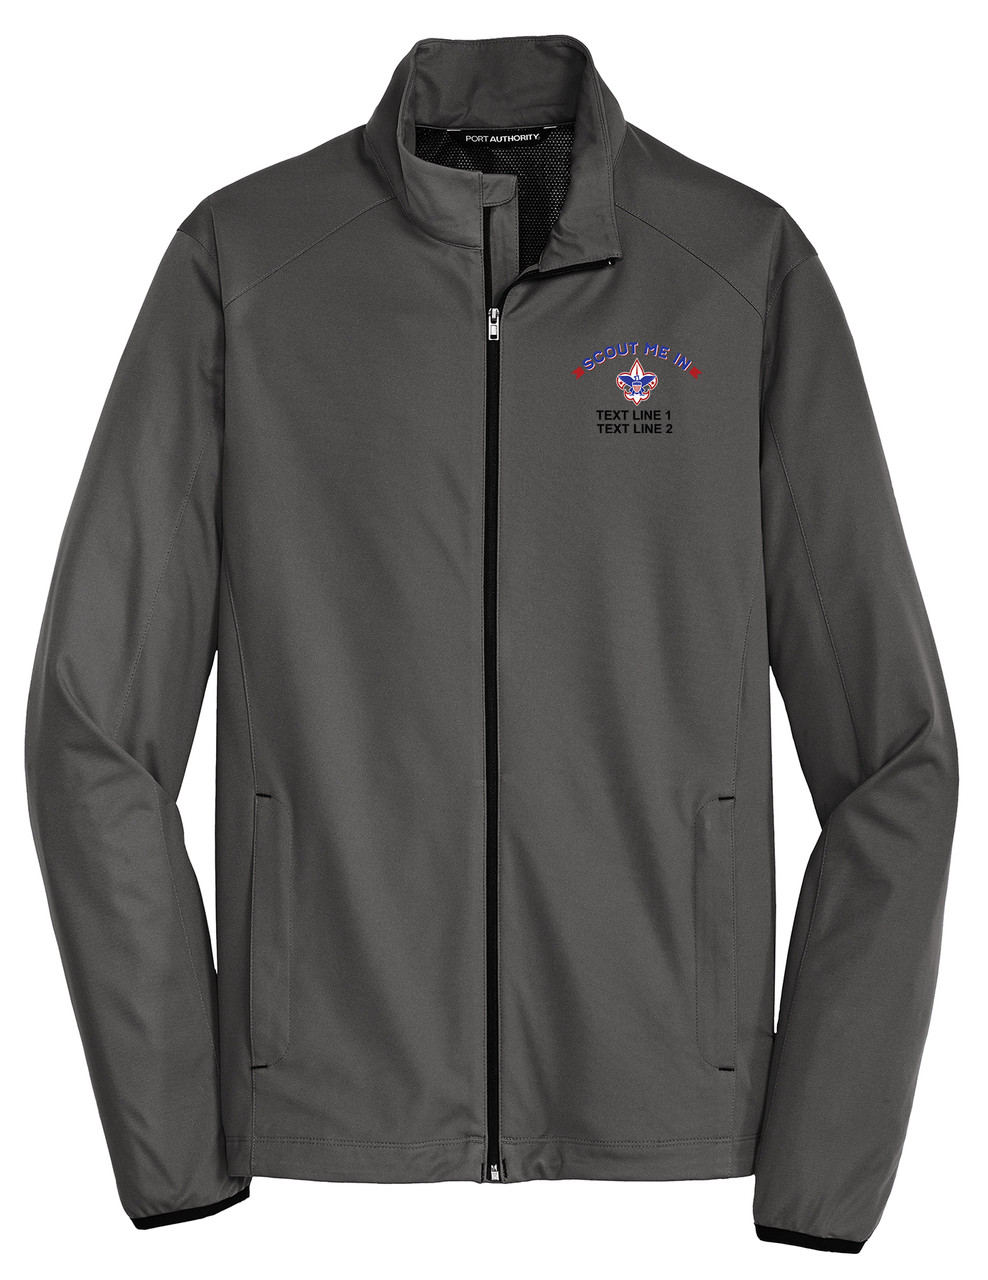 Soft Shell Jacket with Embroidered Scout Me In Corporate Logo